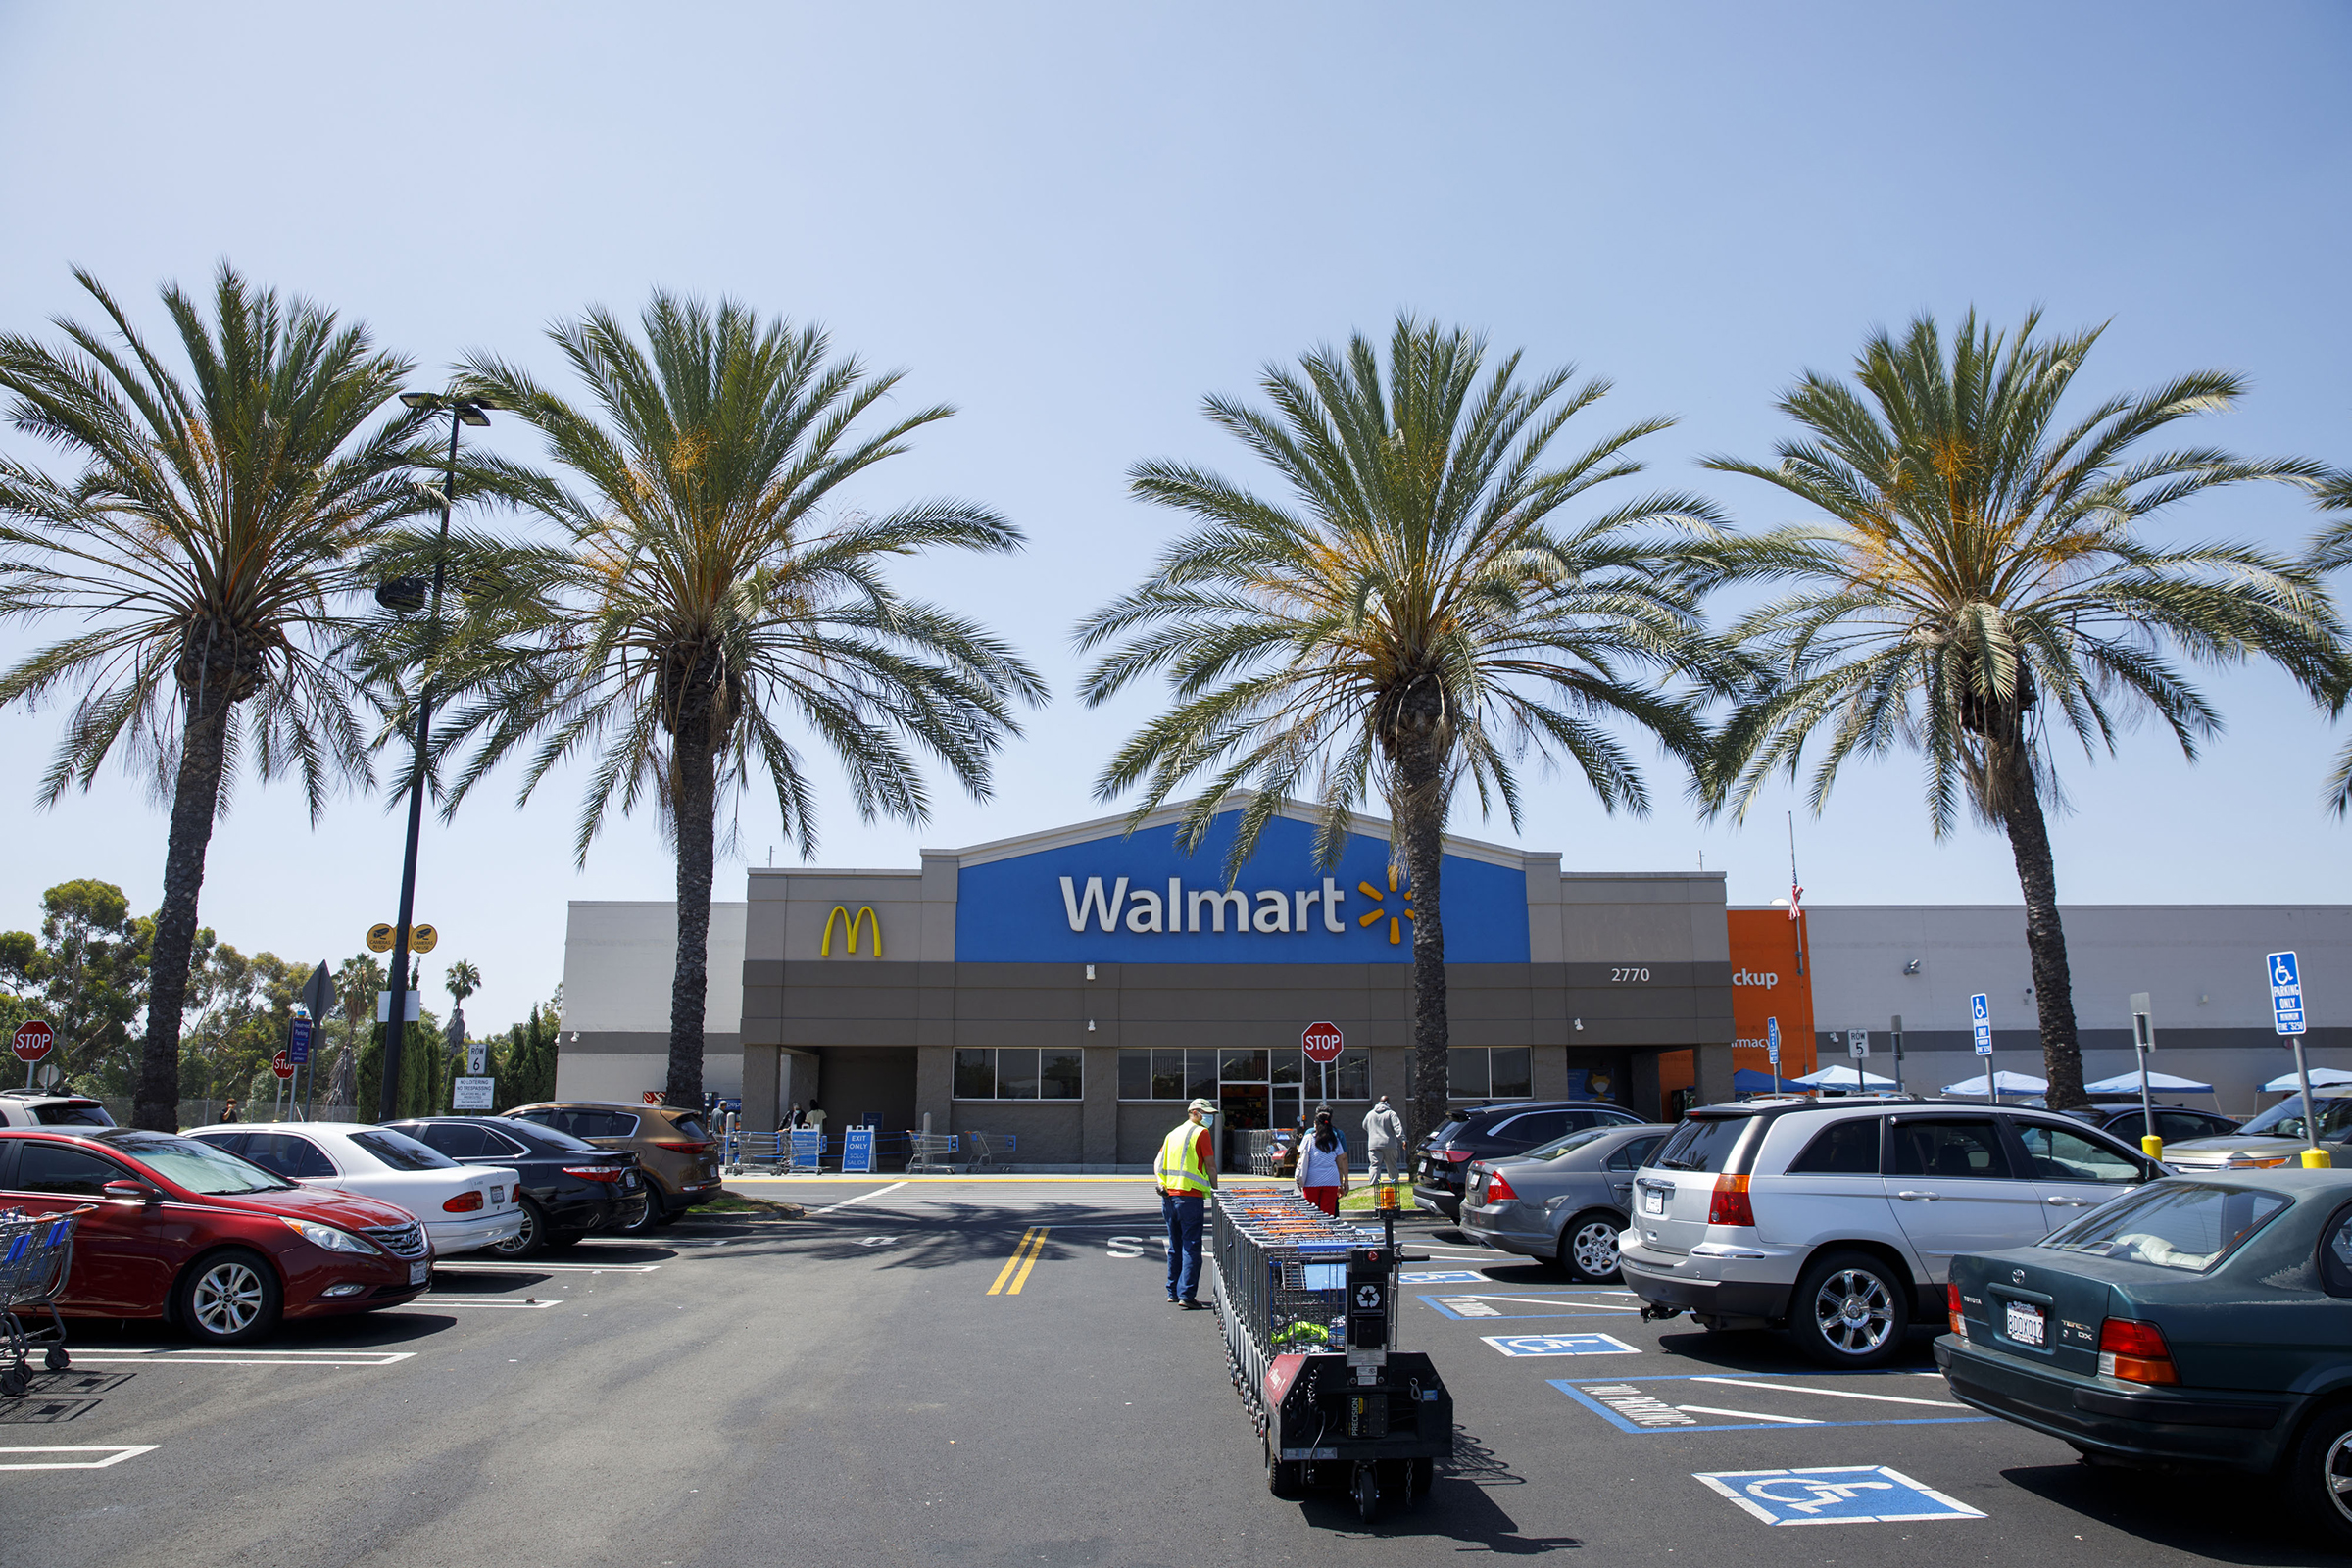 An employee pulls carts towards a Walmart store in Lakewood, California, U.S., on Thursday, July 16, 2020. (Patrick T. Fallon—Bloomberg/Getty Images)